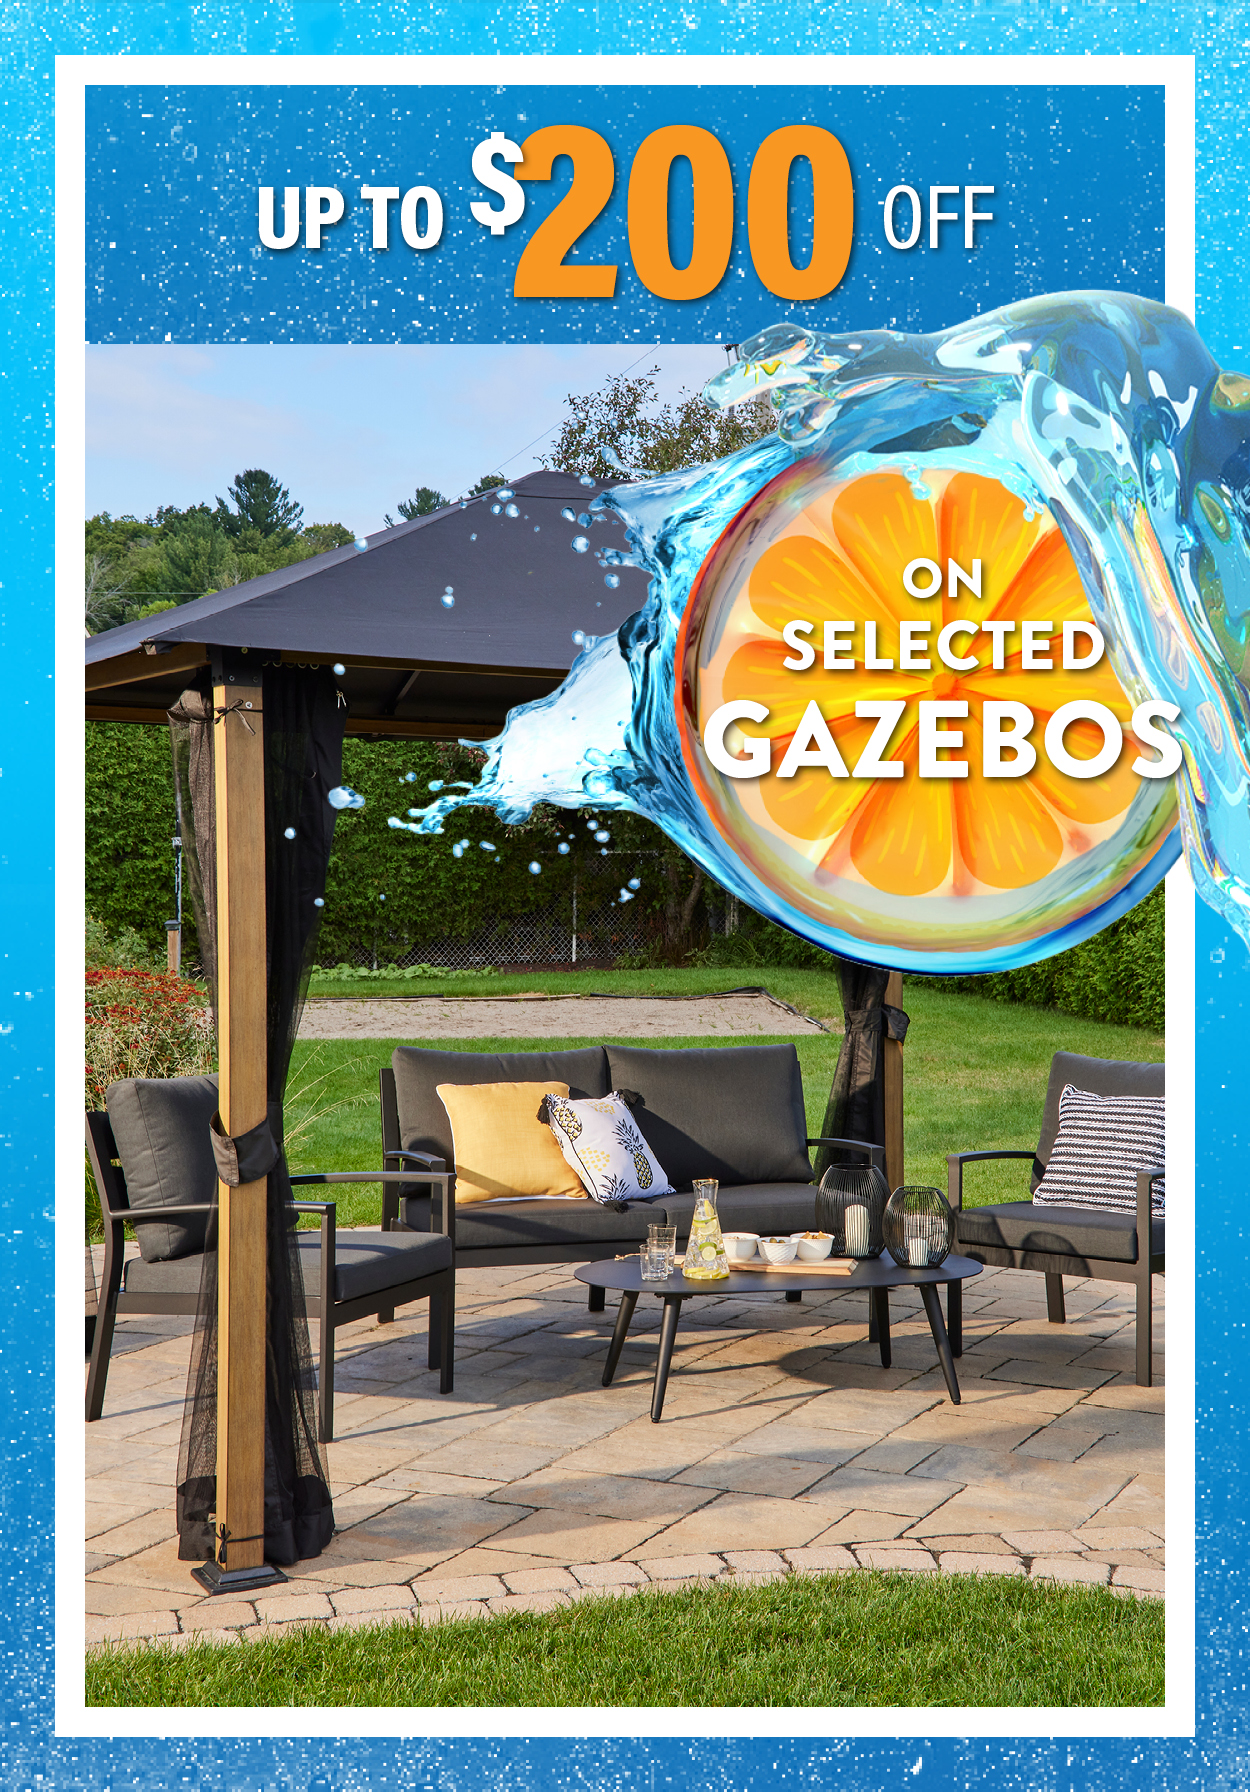 Up to $200 off selected gazebos